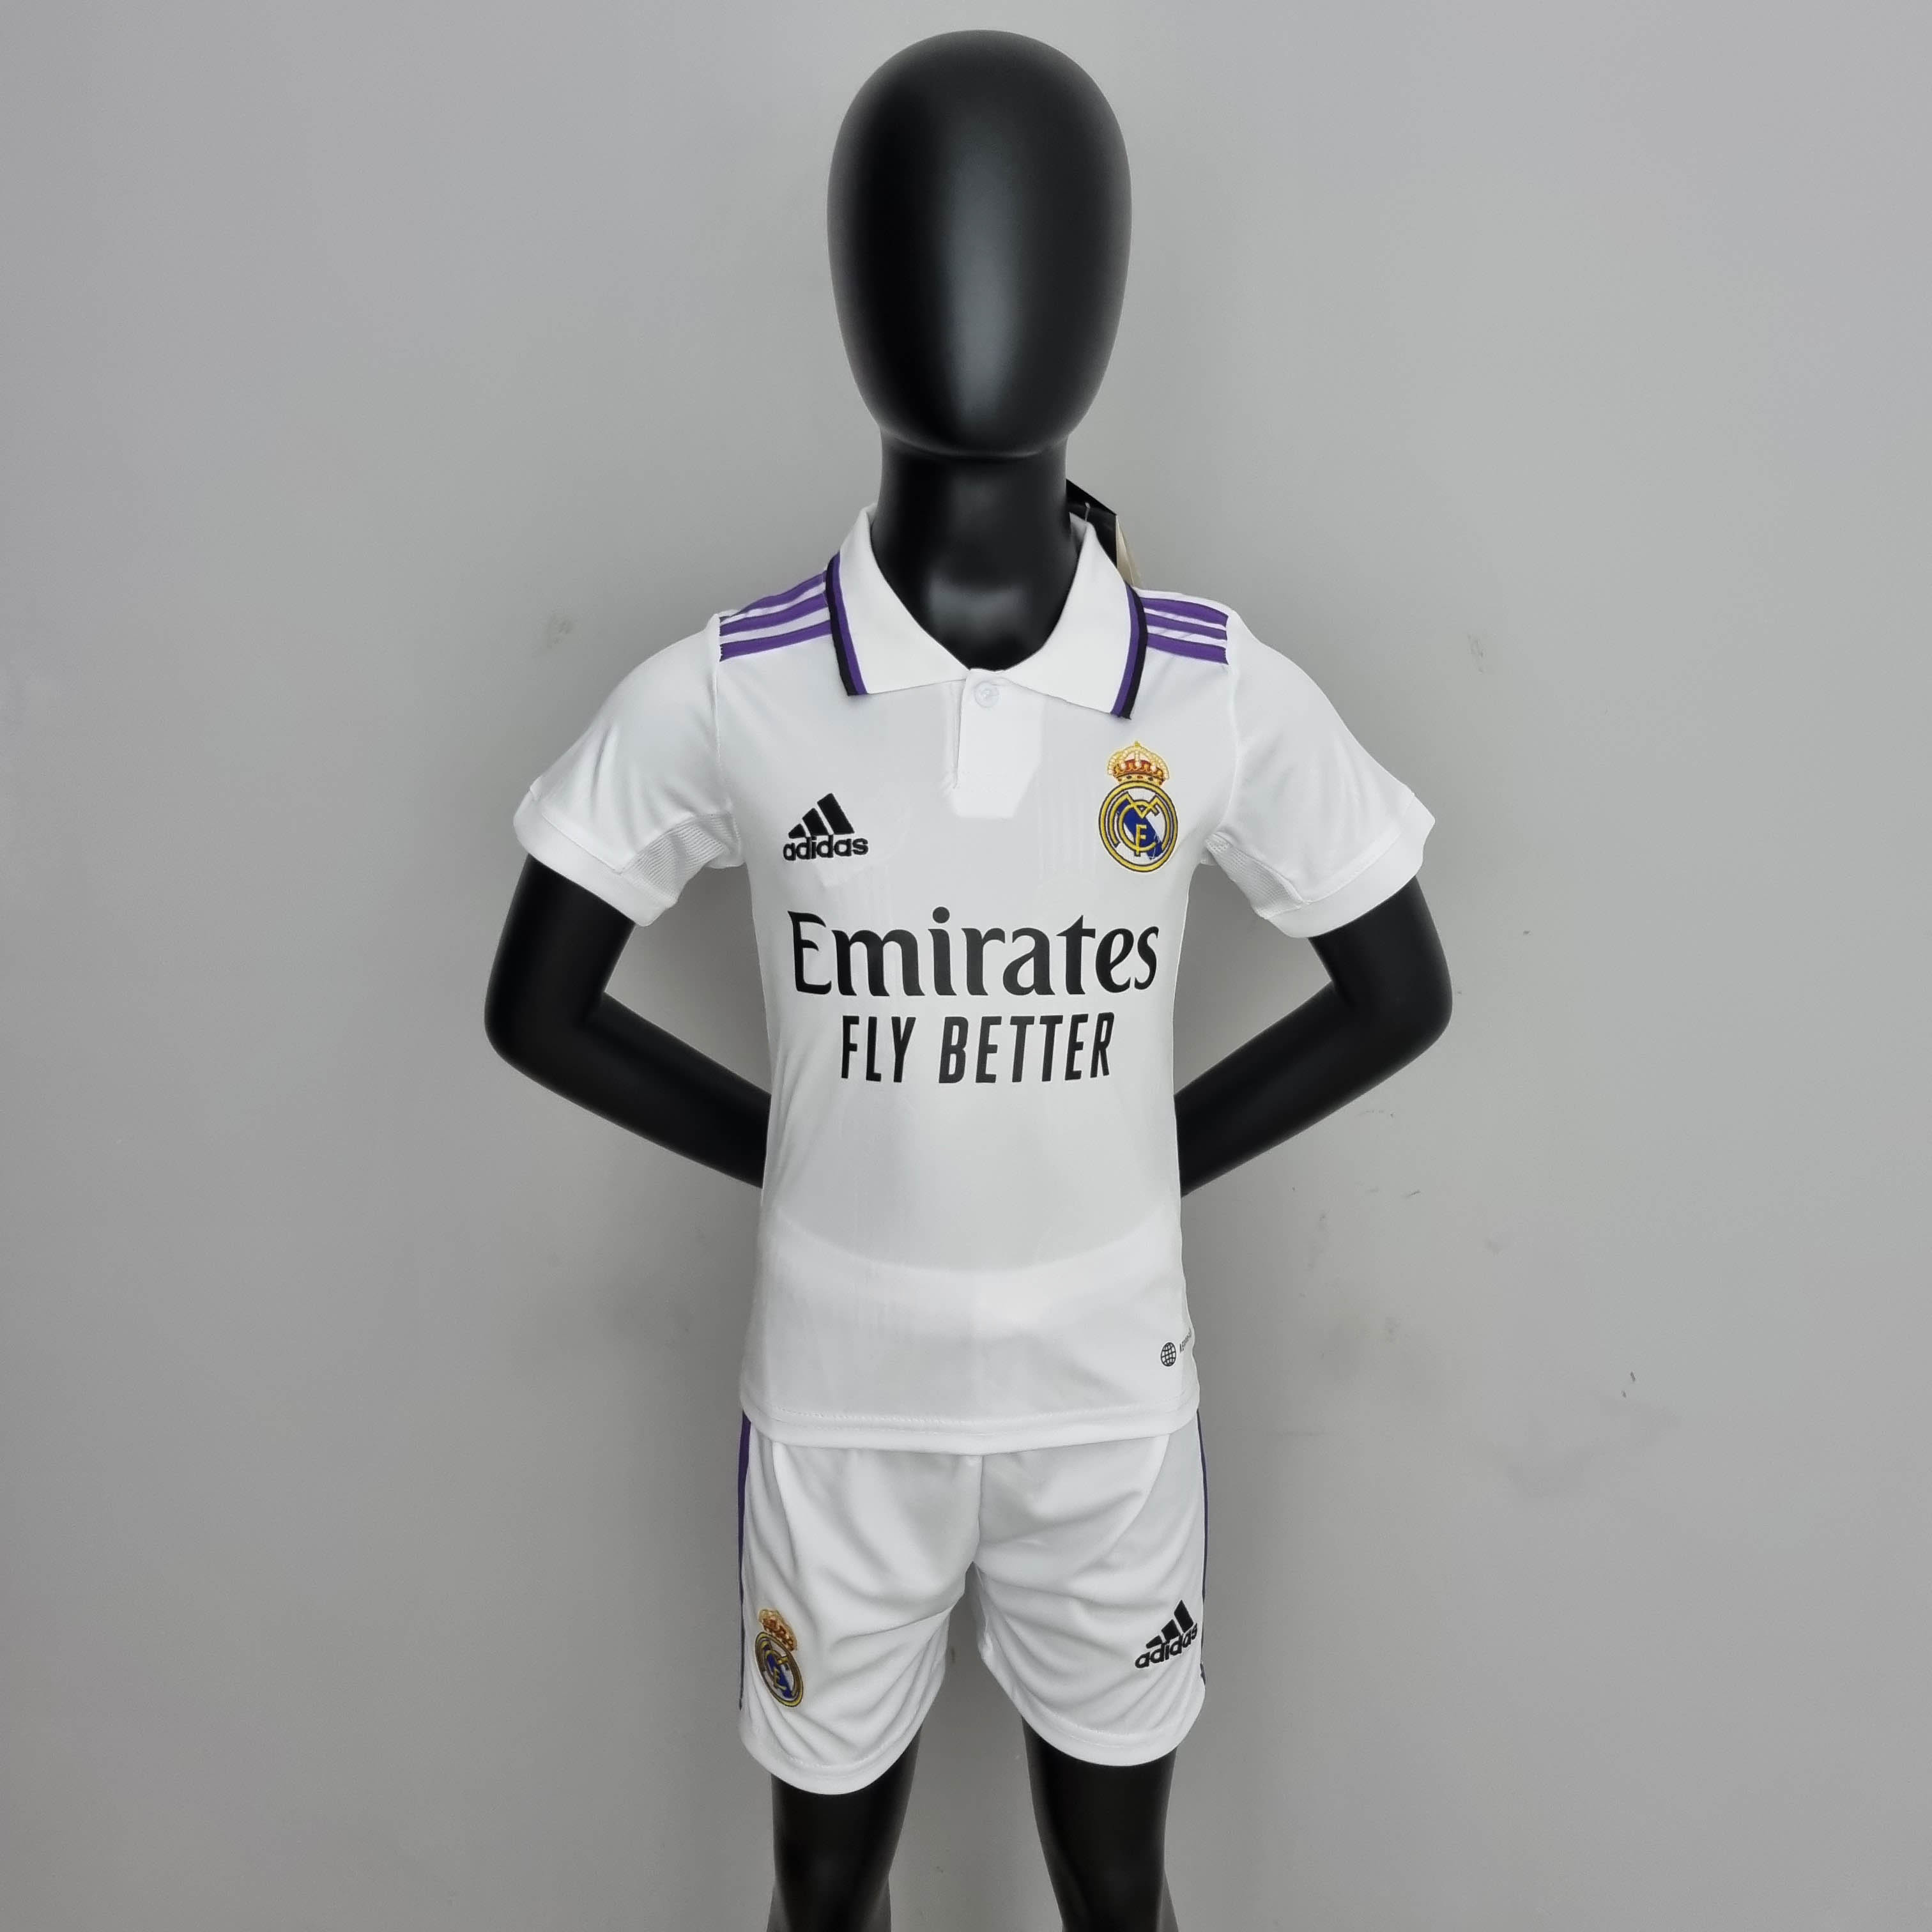 Adidas Real Madrid Fly Emirates White/Navy Blue Soccer Jersey Youth Kid Size